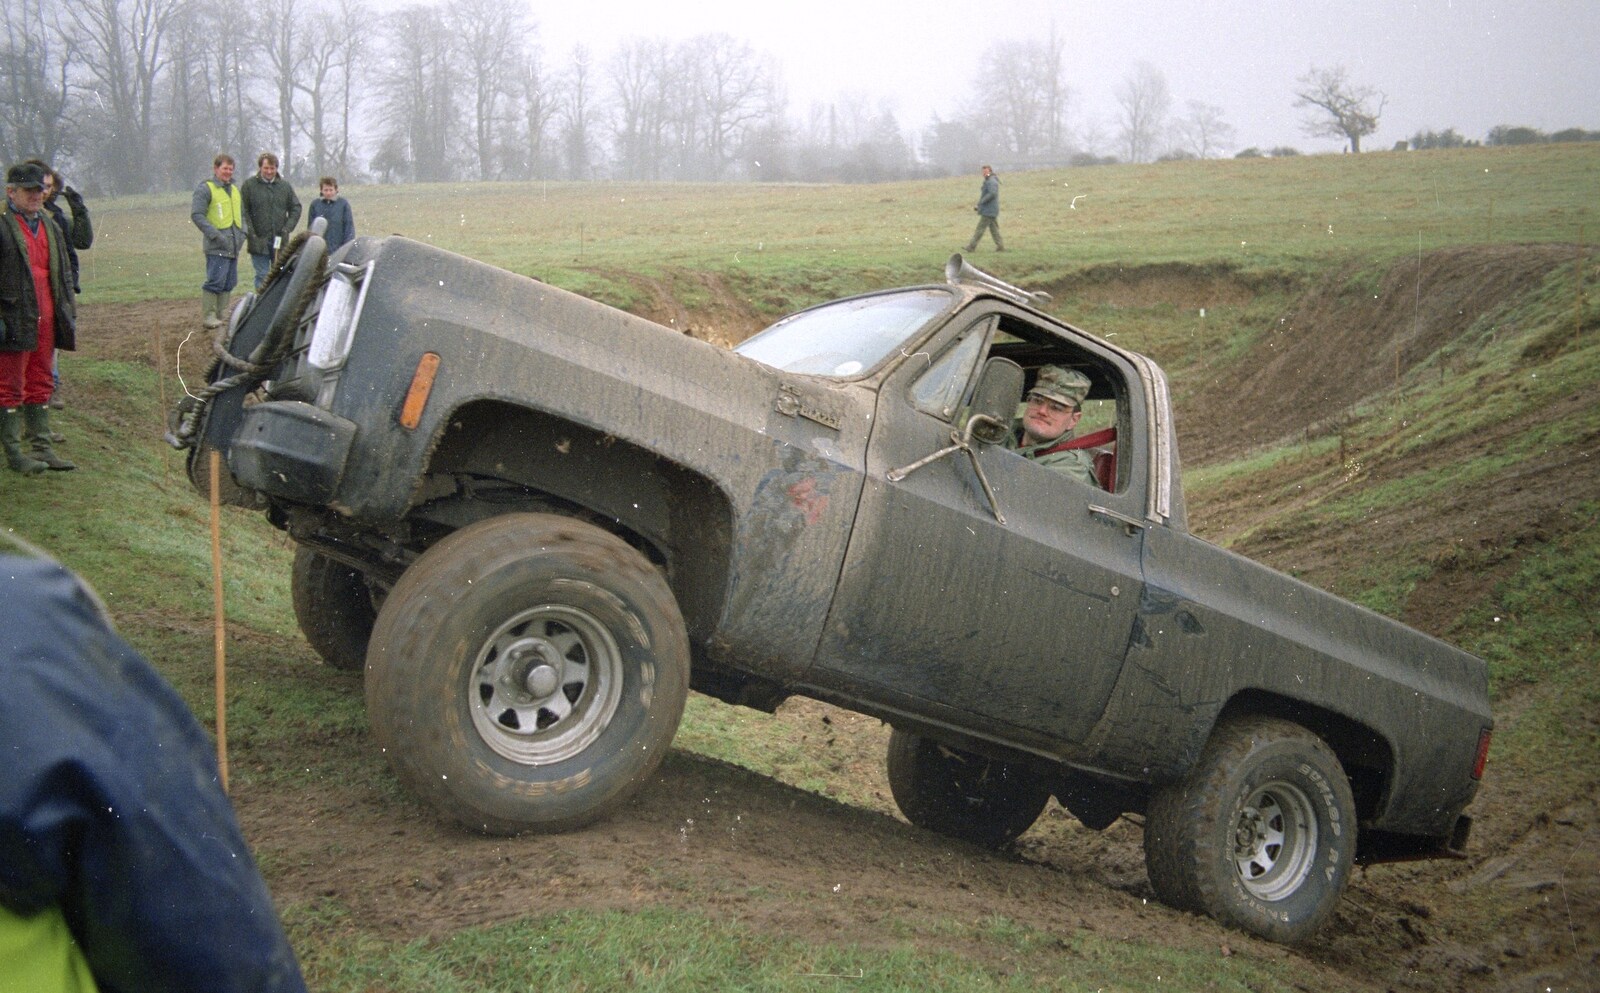 A dude called Baron in his V-8 Blazer from Printec at the Park Hotel, Diss, Norfolk - 14th January 1992